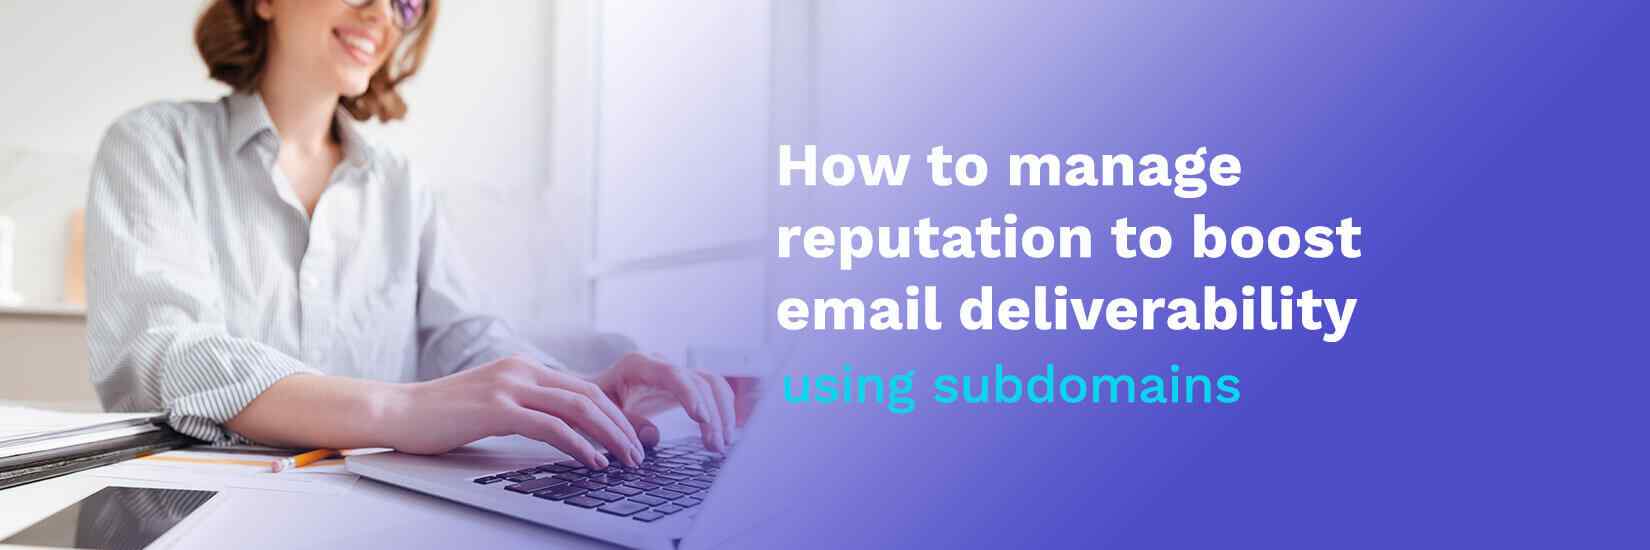 How To Manage Reputation & Boost Email Deliverability With Subdomains